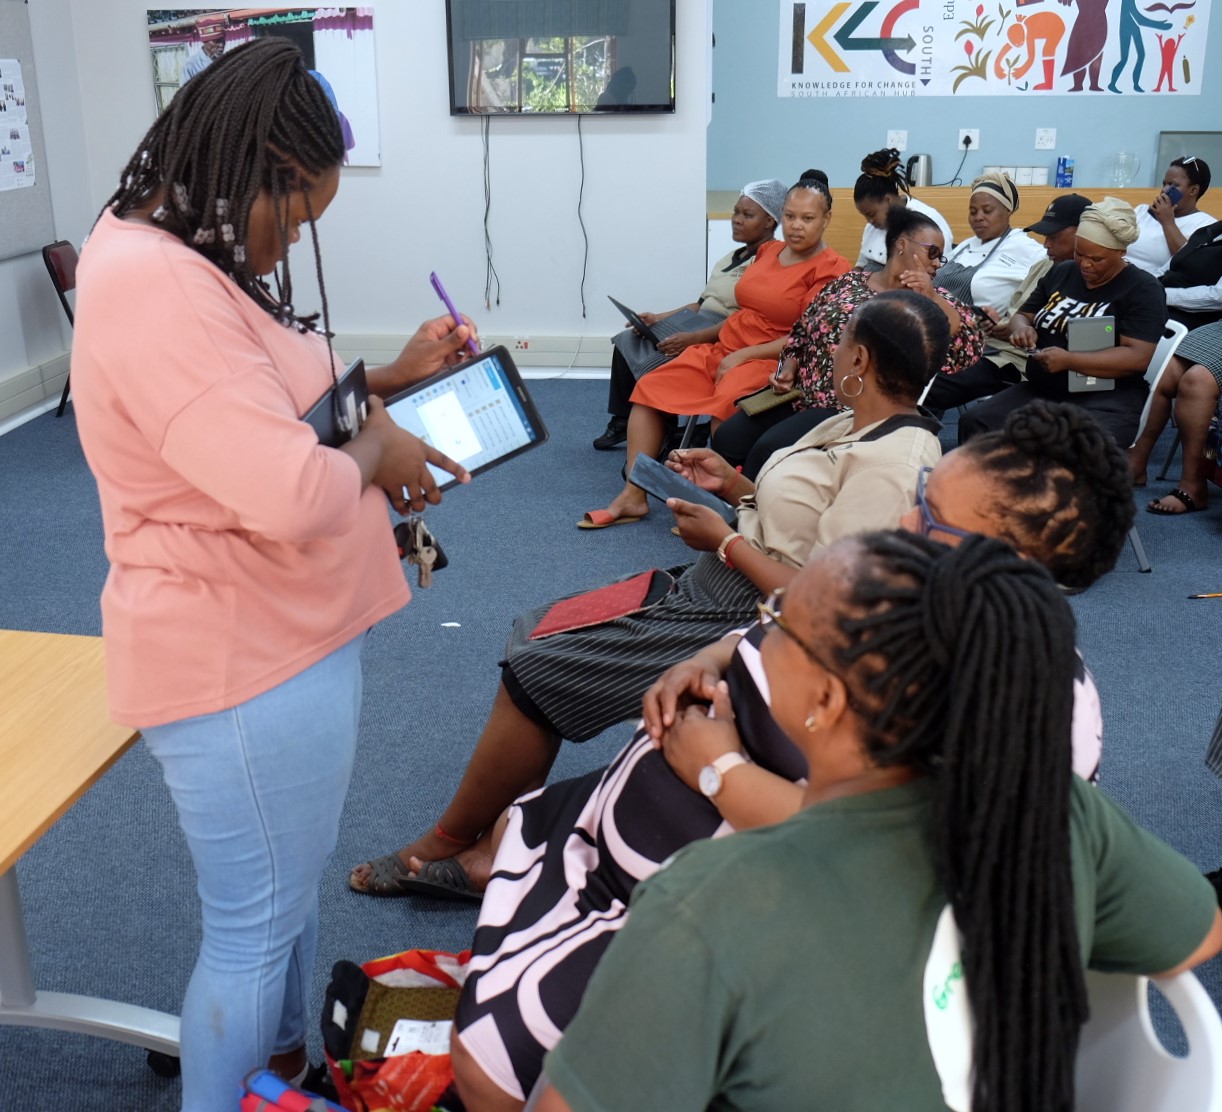 Vulindlela project coordinator Thadiswa Nqowana inserts an SD card into a tablet during a workshop for Vuli’ndlela members at the Knowledge for Change (K4C) Hub at the Rhodes University Community Engagement centre on Wednesday, 14 February. Photo: Rod Amner